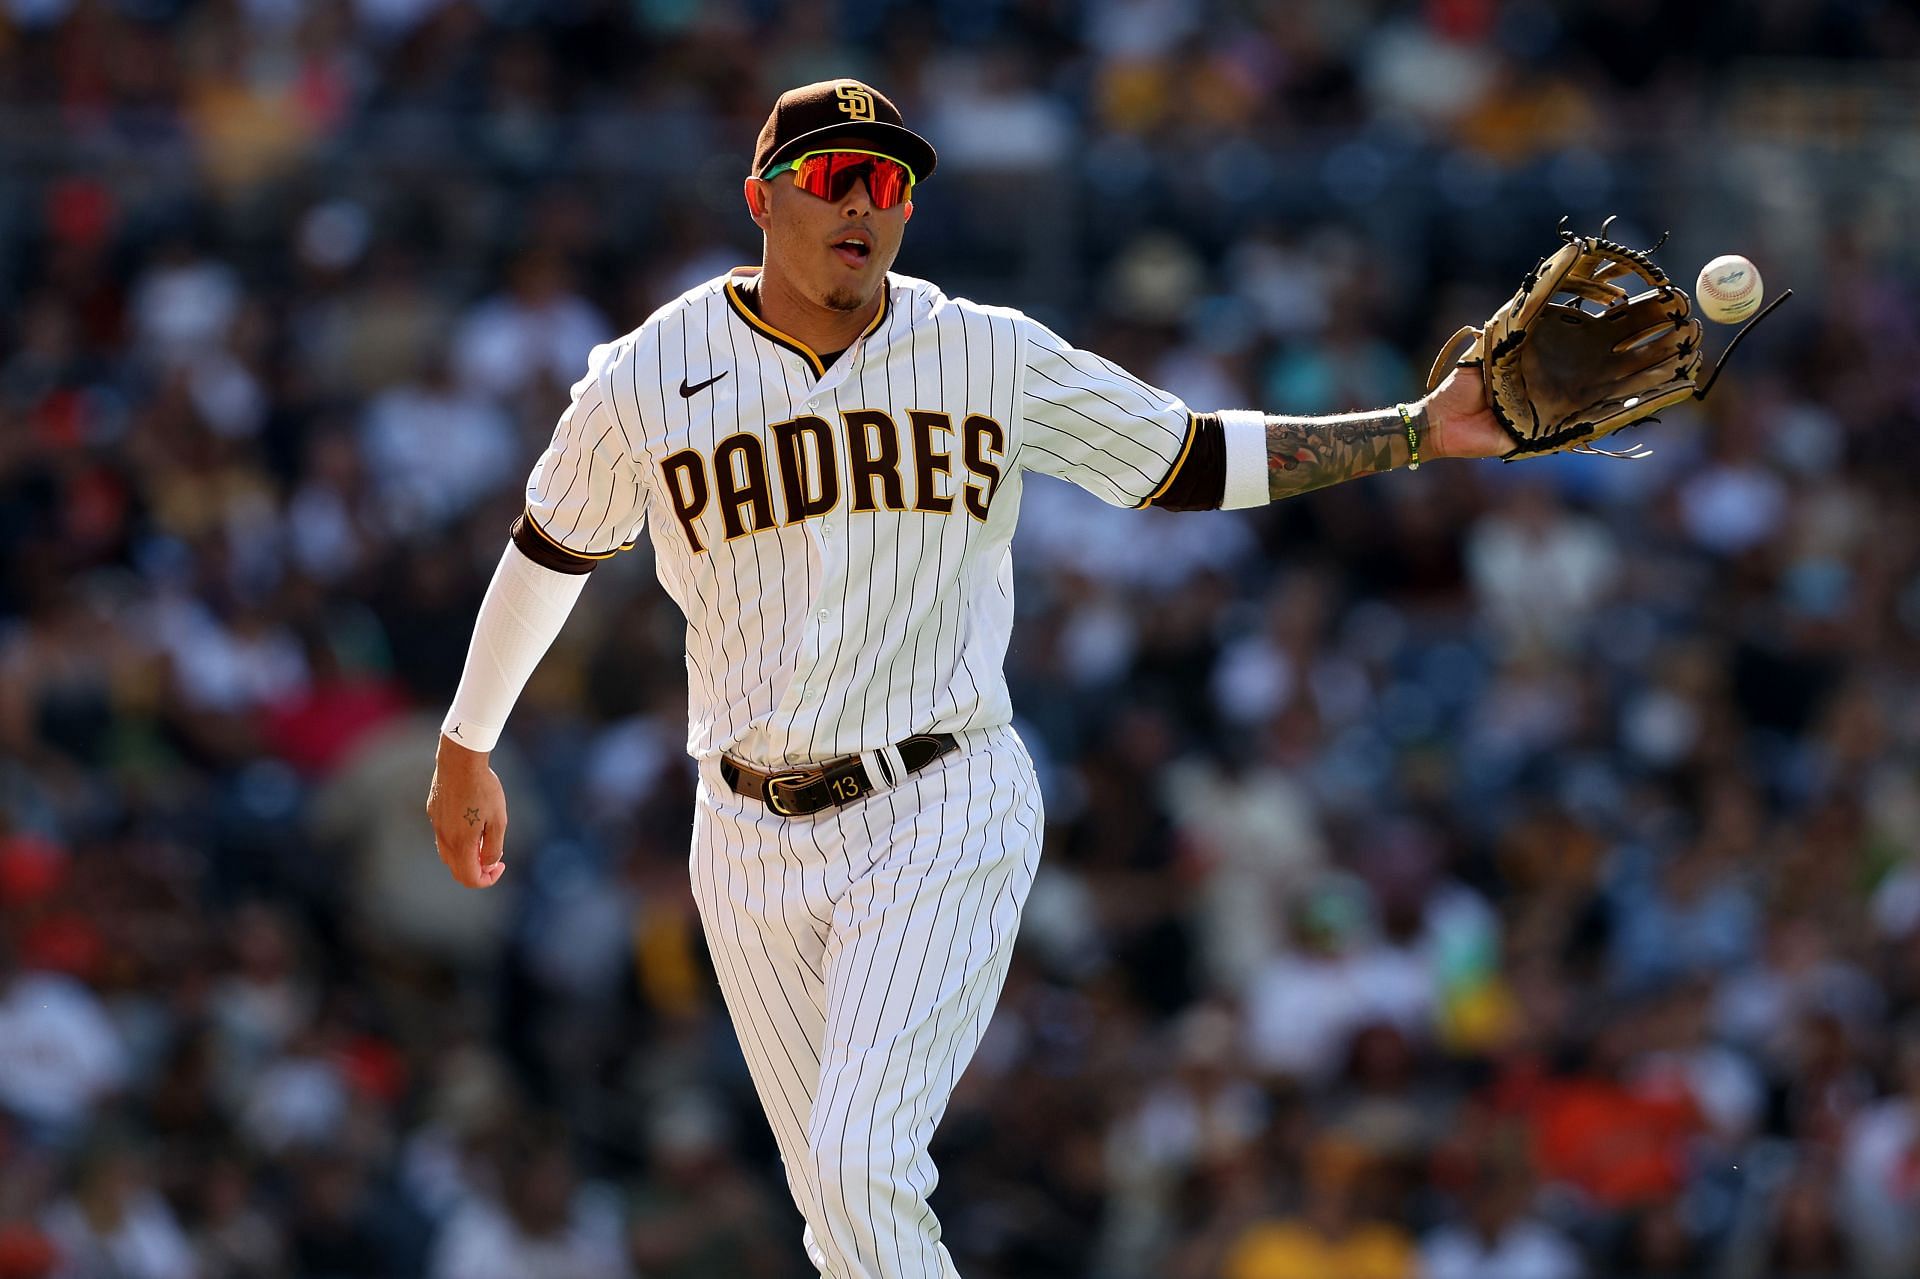 Manny Machado of the San Diego Padres during a game against the San Francisco Giants